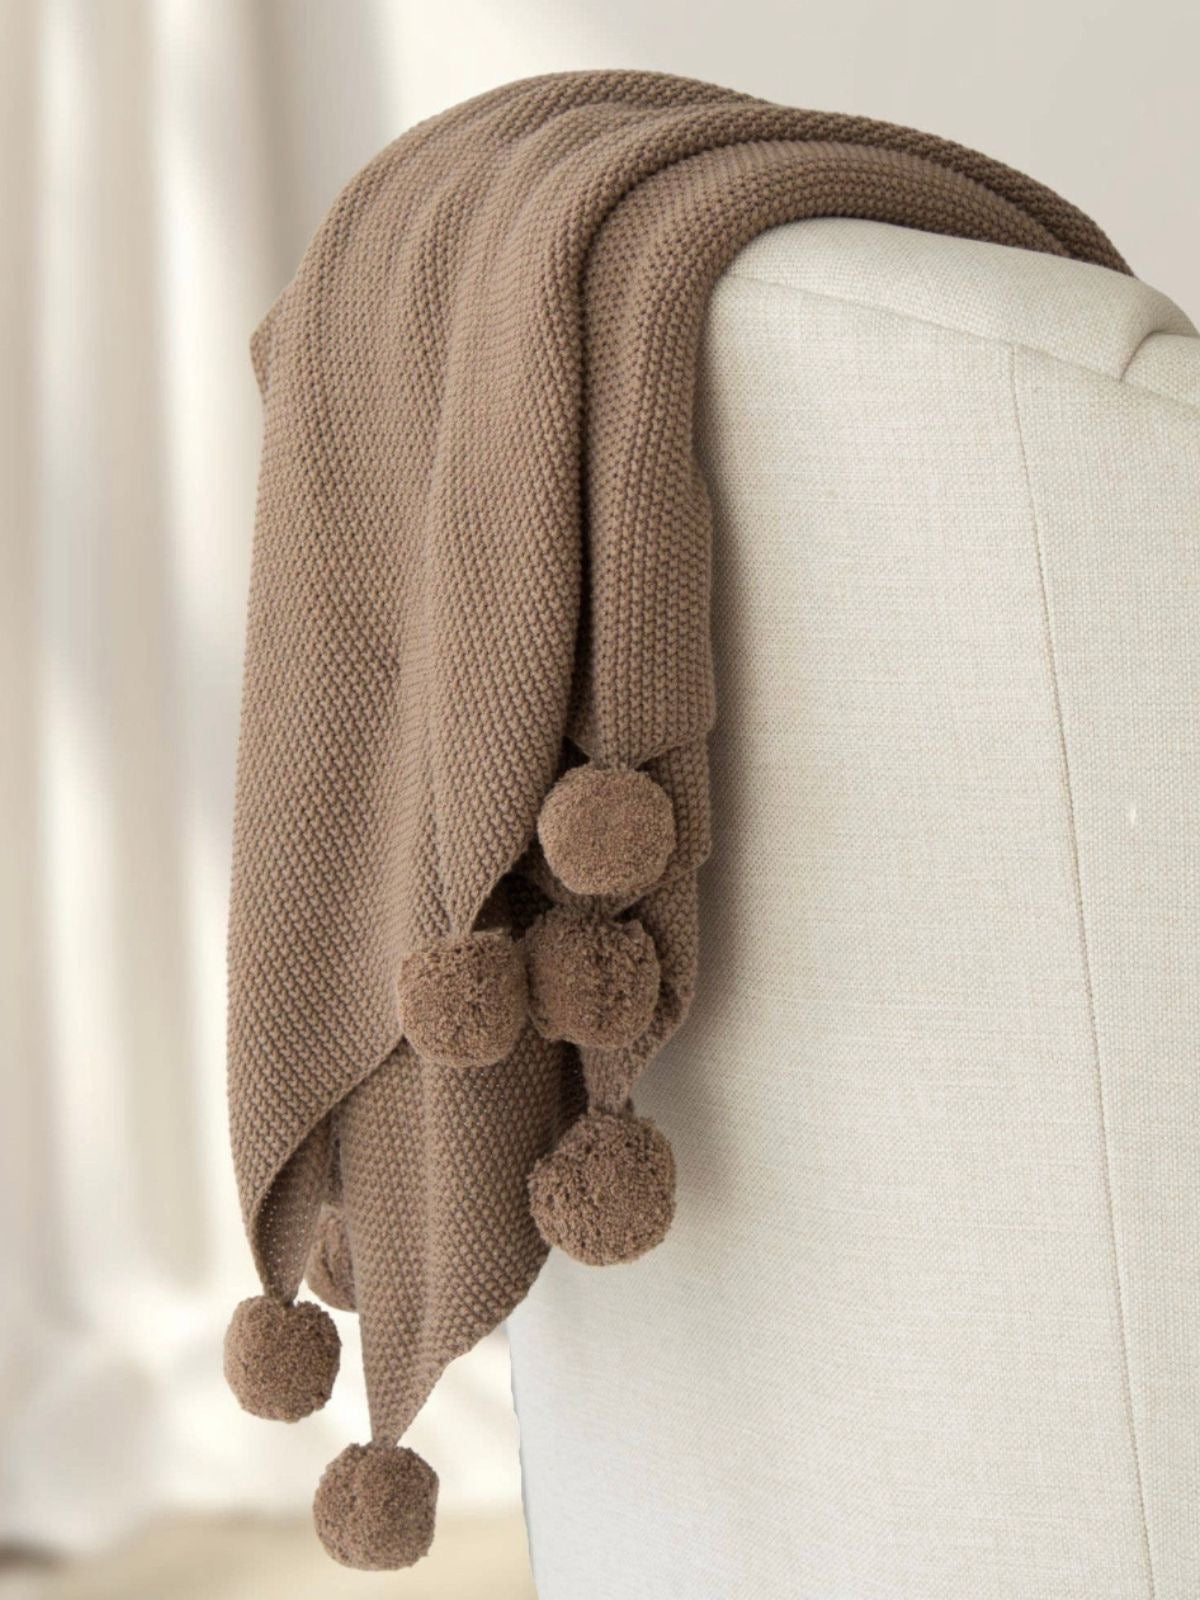 100% Cotton Seedstitch Throw Blanket with Pom Poms in Luxurious Mushroom Color, 50W x 60L. 